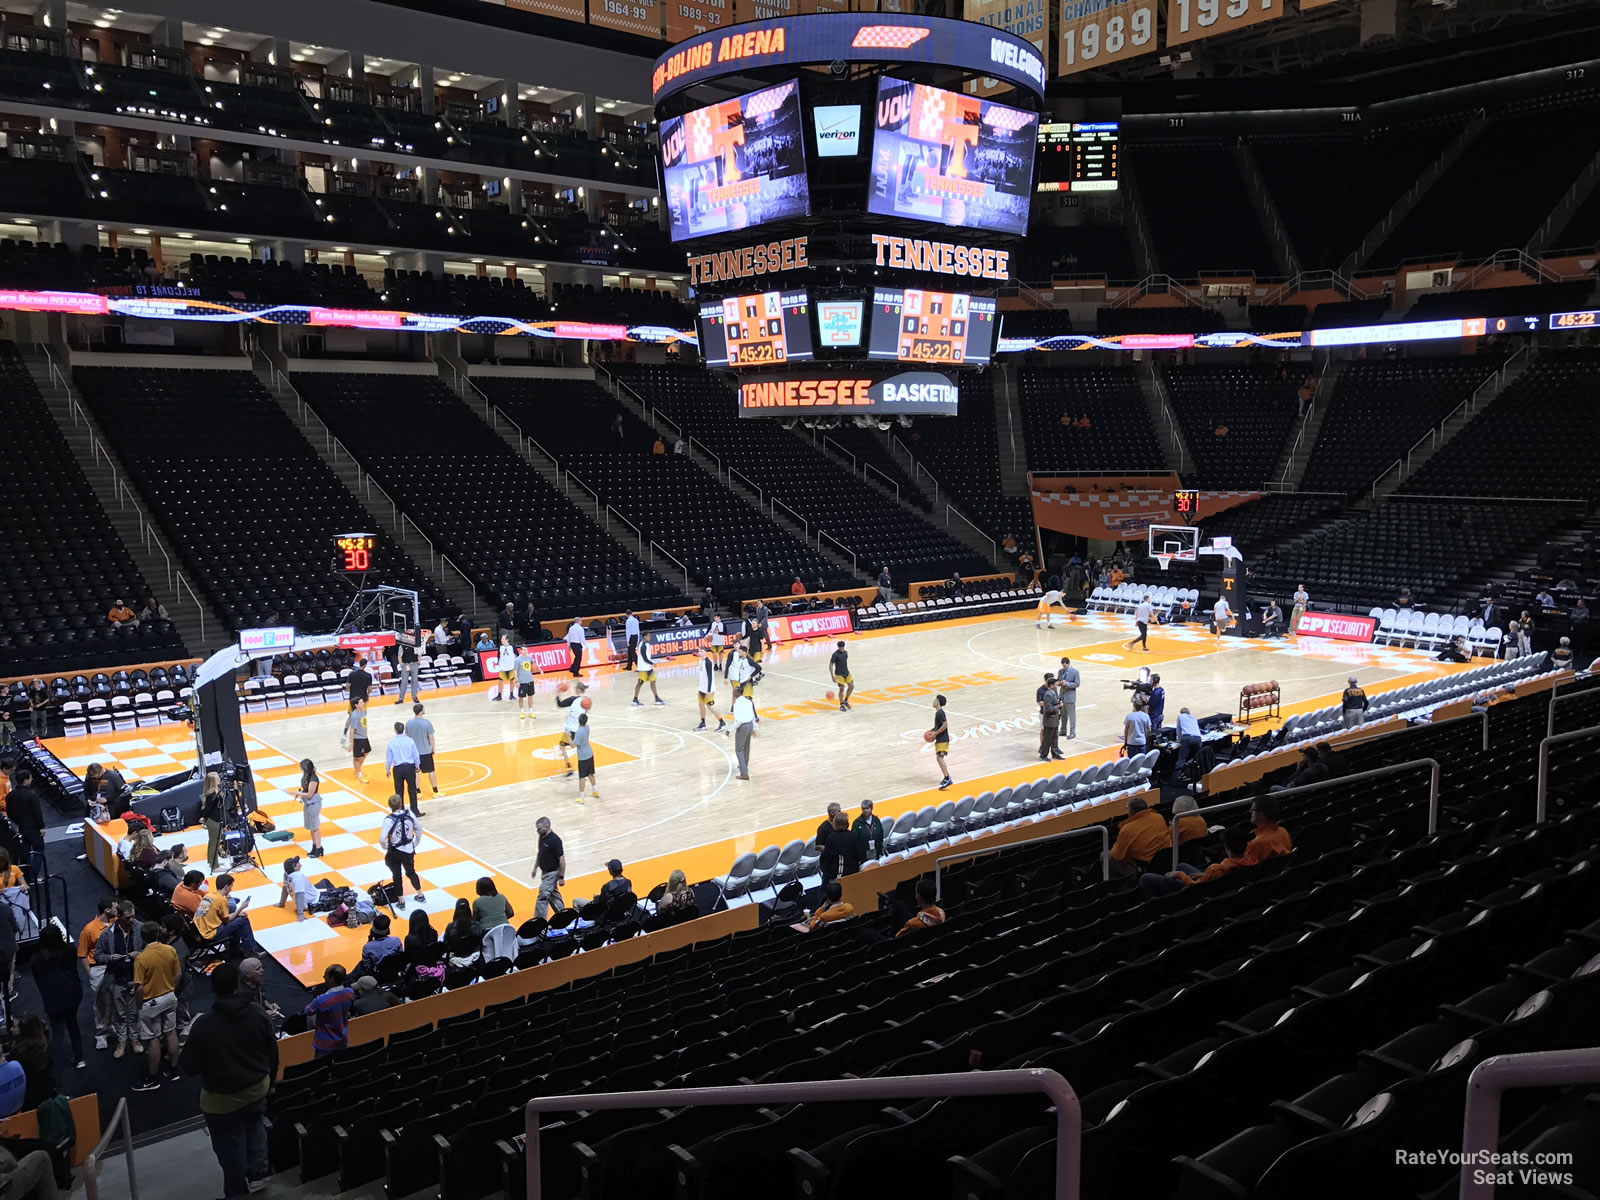 section 124, row 17 seat view  - thompson-boling arena